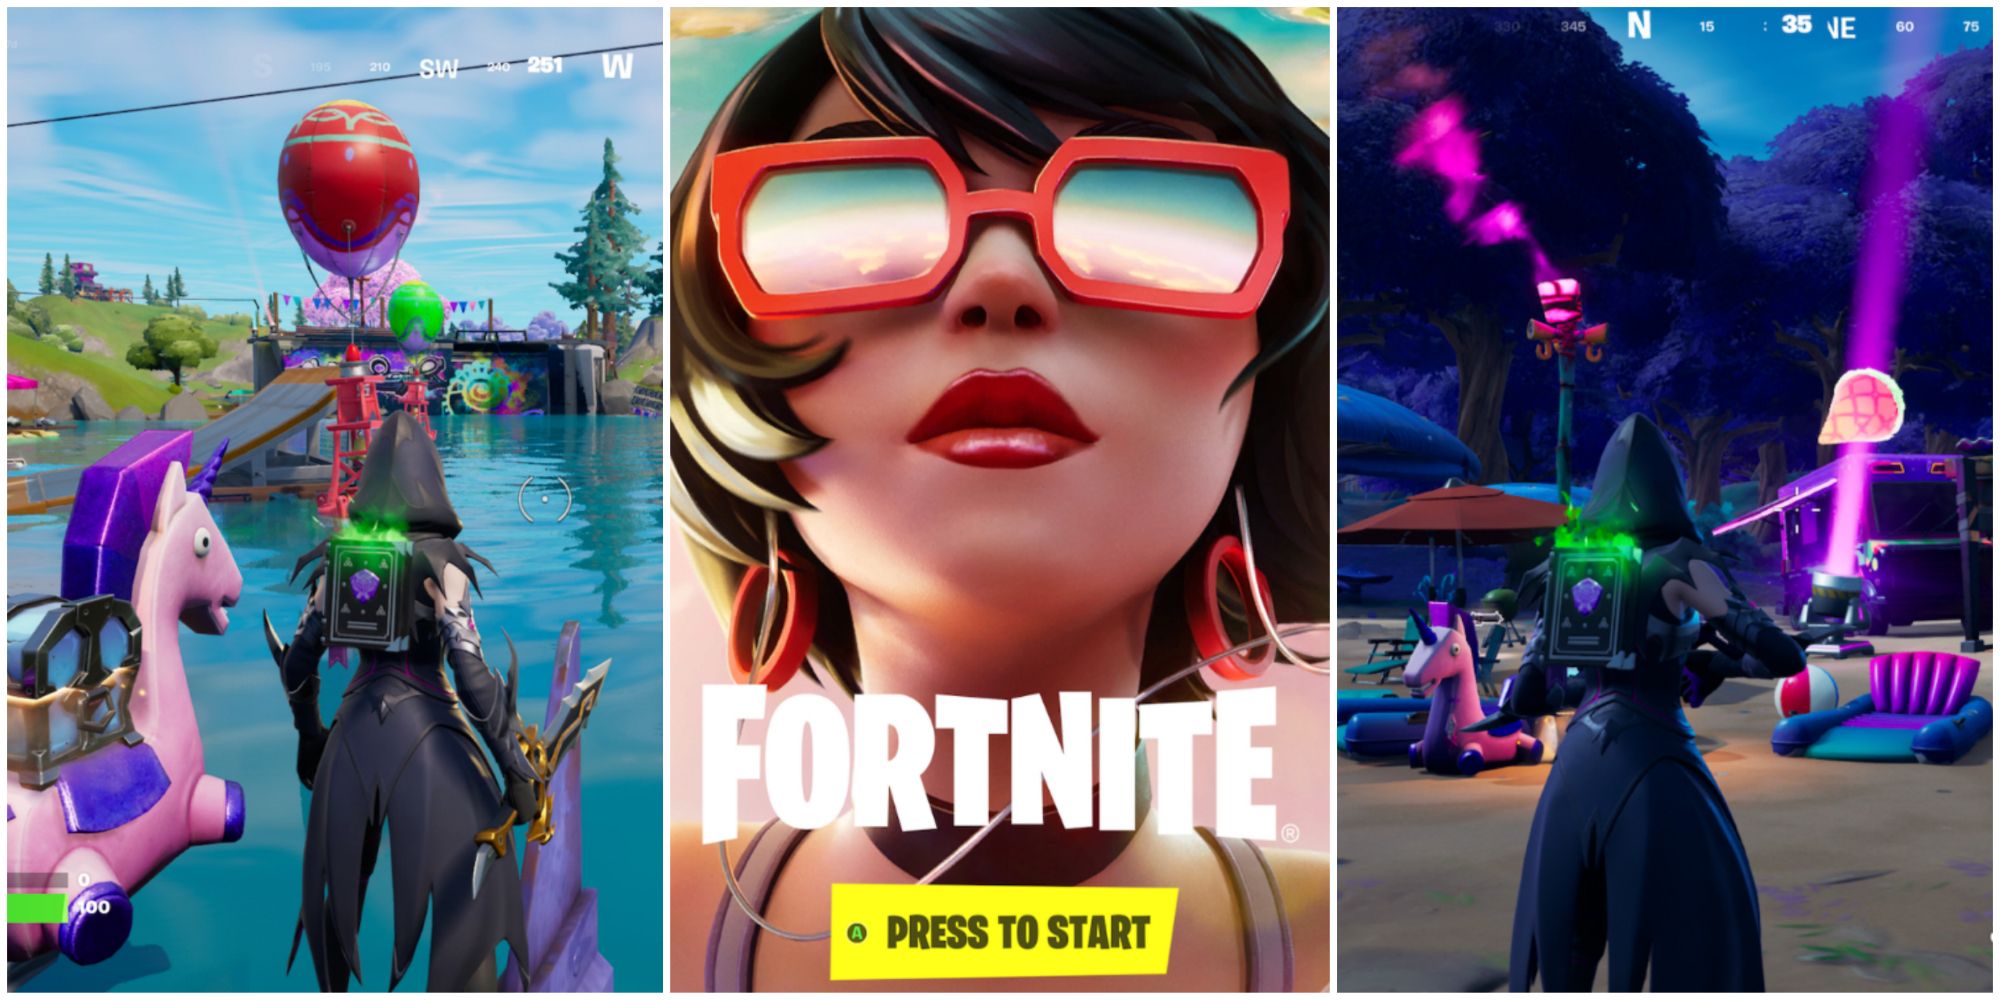 fortnite character near unicorn floaty and loot lake, fortnite vibin theme menu, fortnite character on beach near party featured